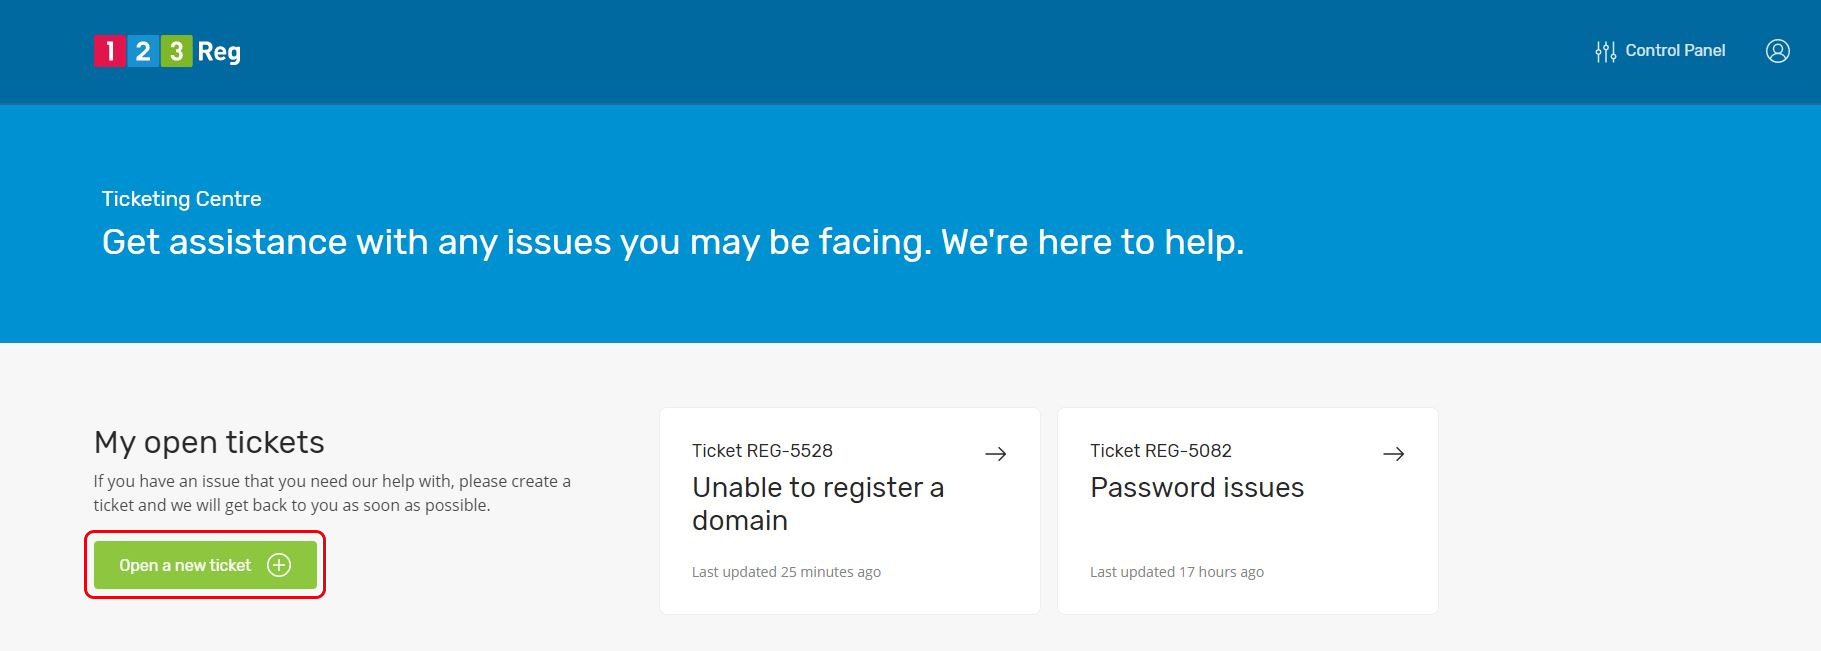 Unable to open support tickets